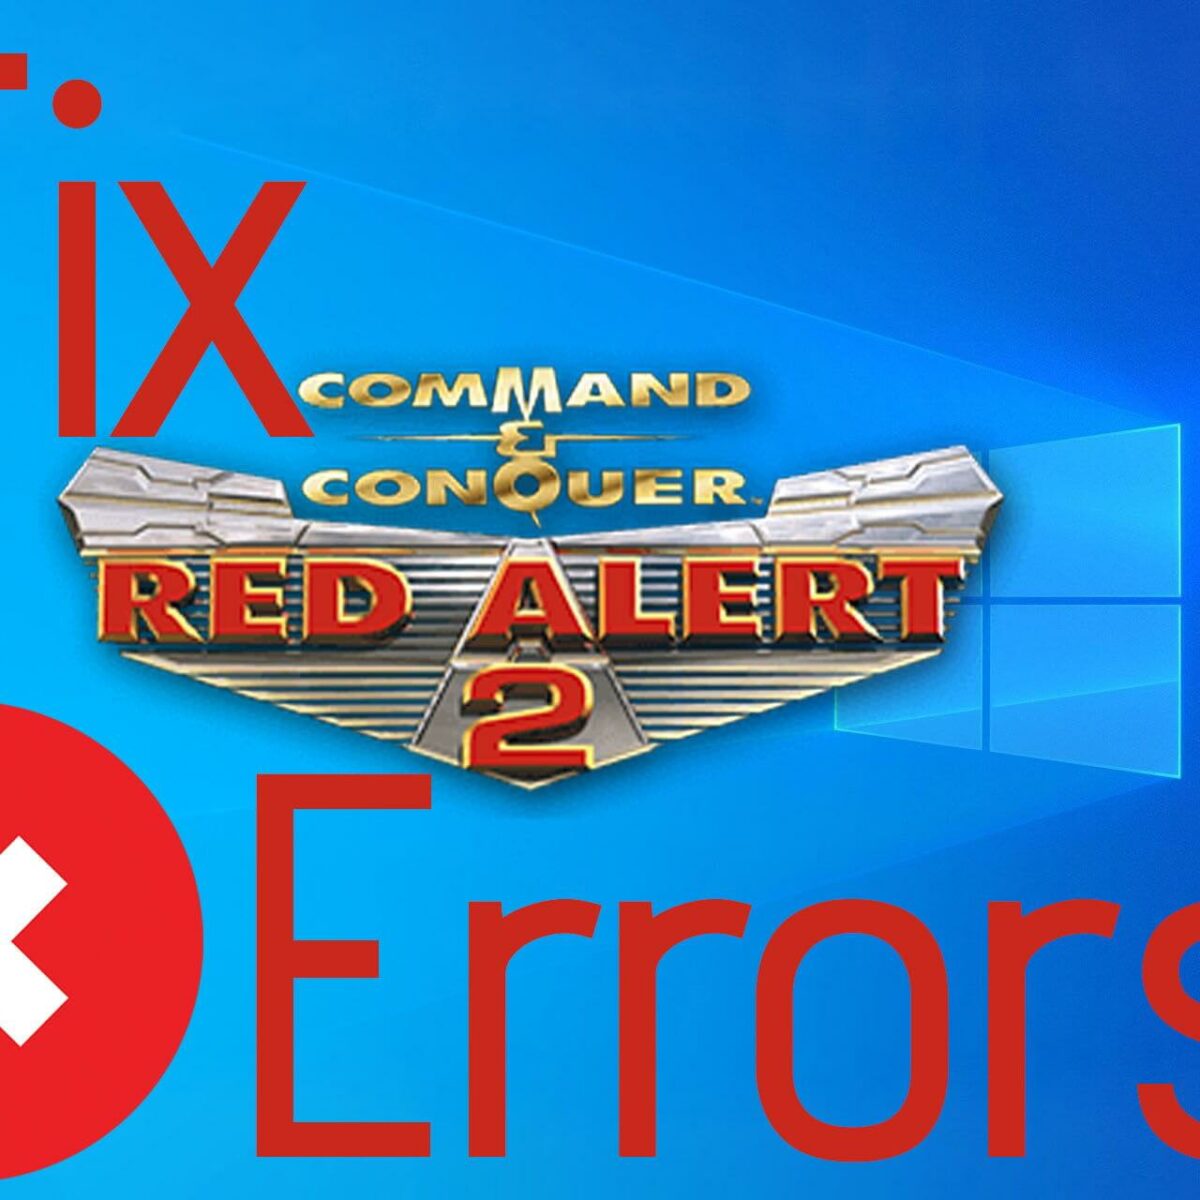 Land Børnehave Pebish How to fix Red Alert 2 issues in Windows 10/11